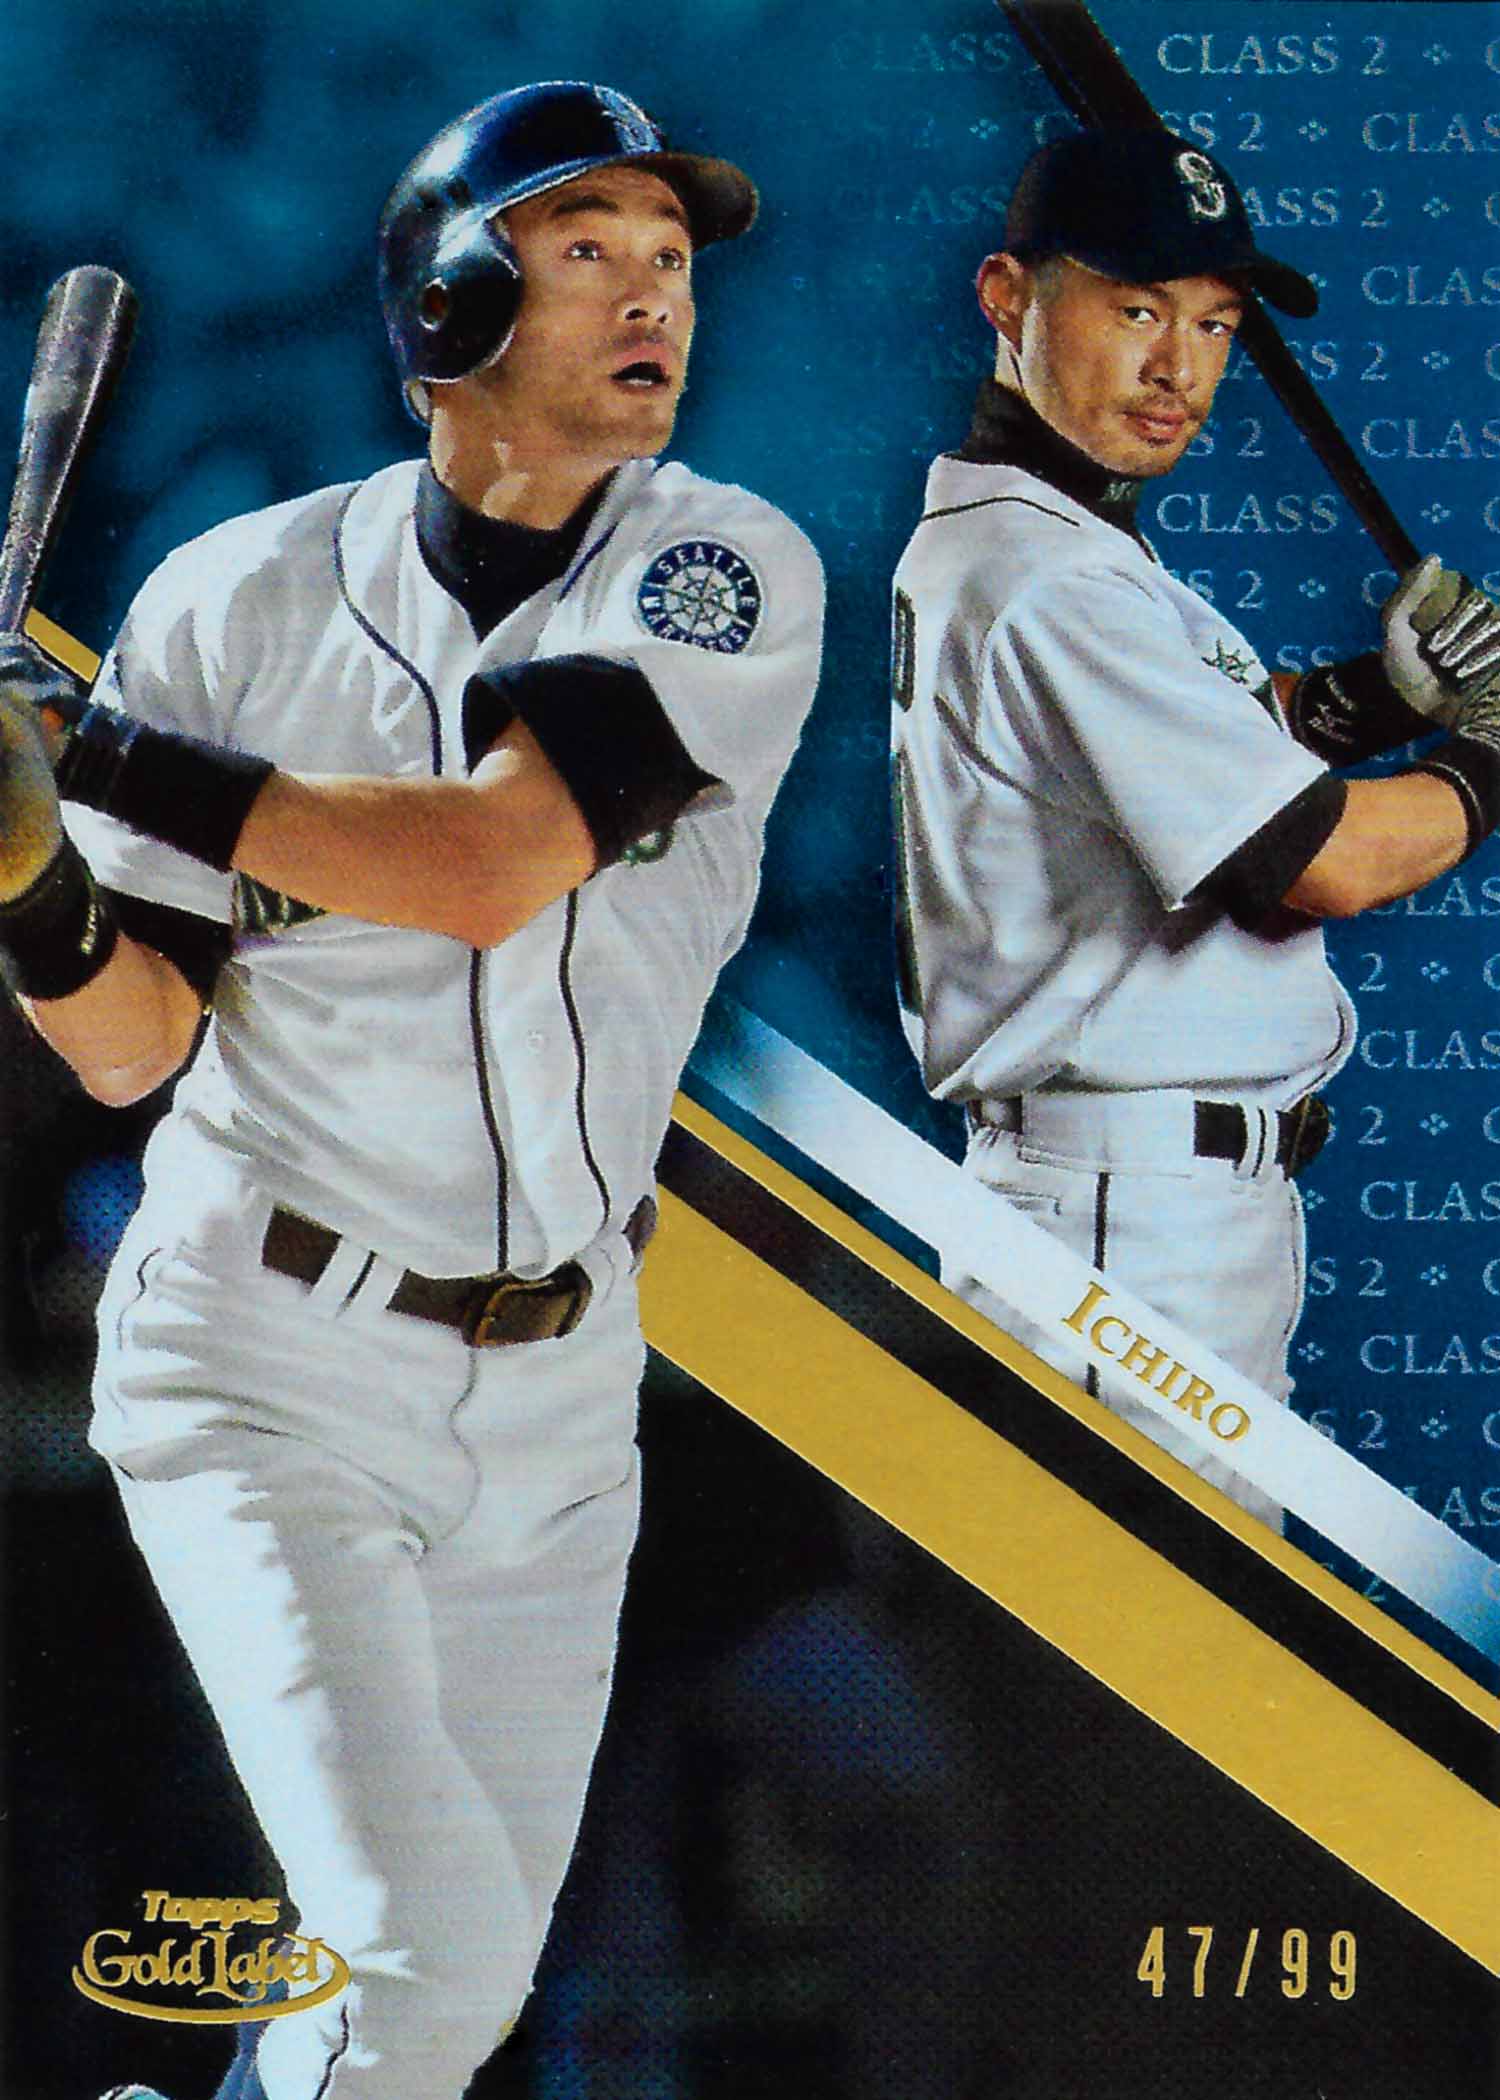 2019 Topps Gold Label Class 2 Blue